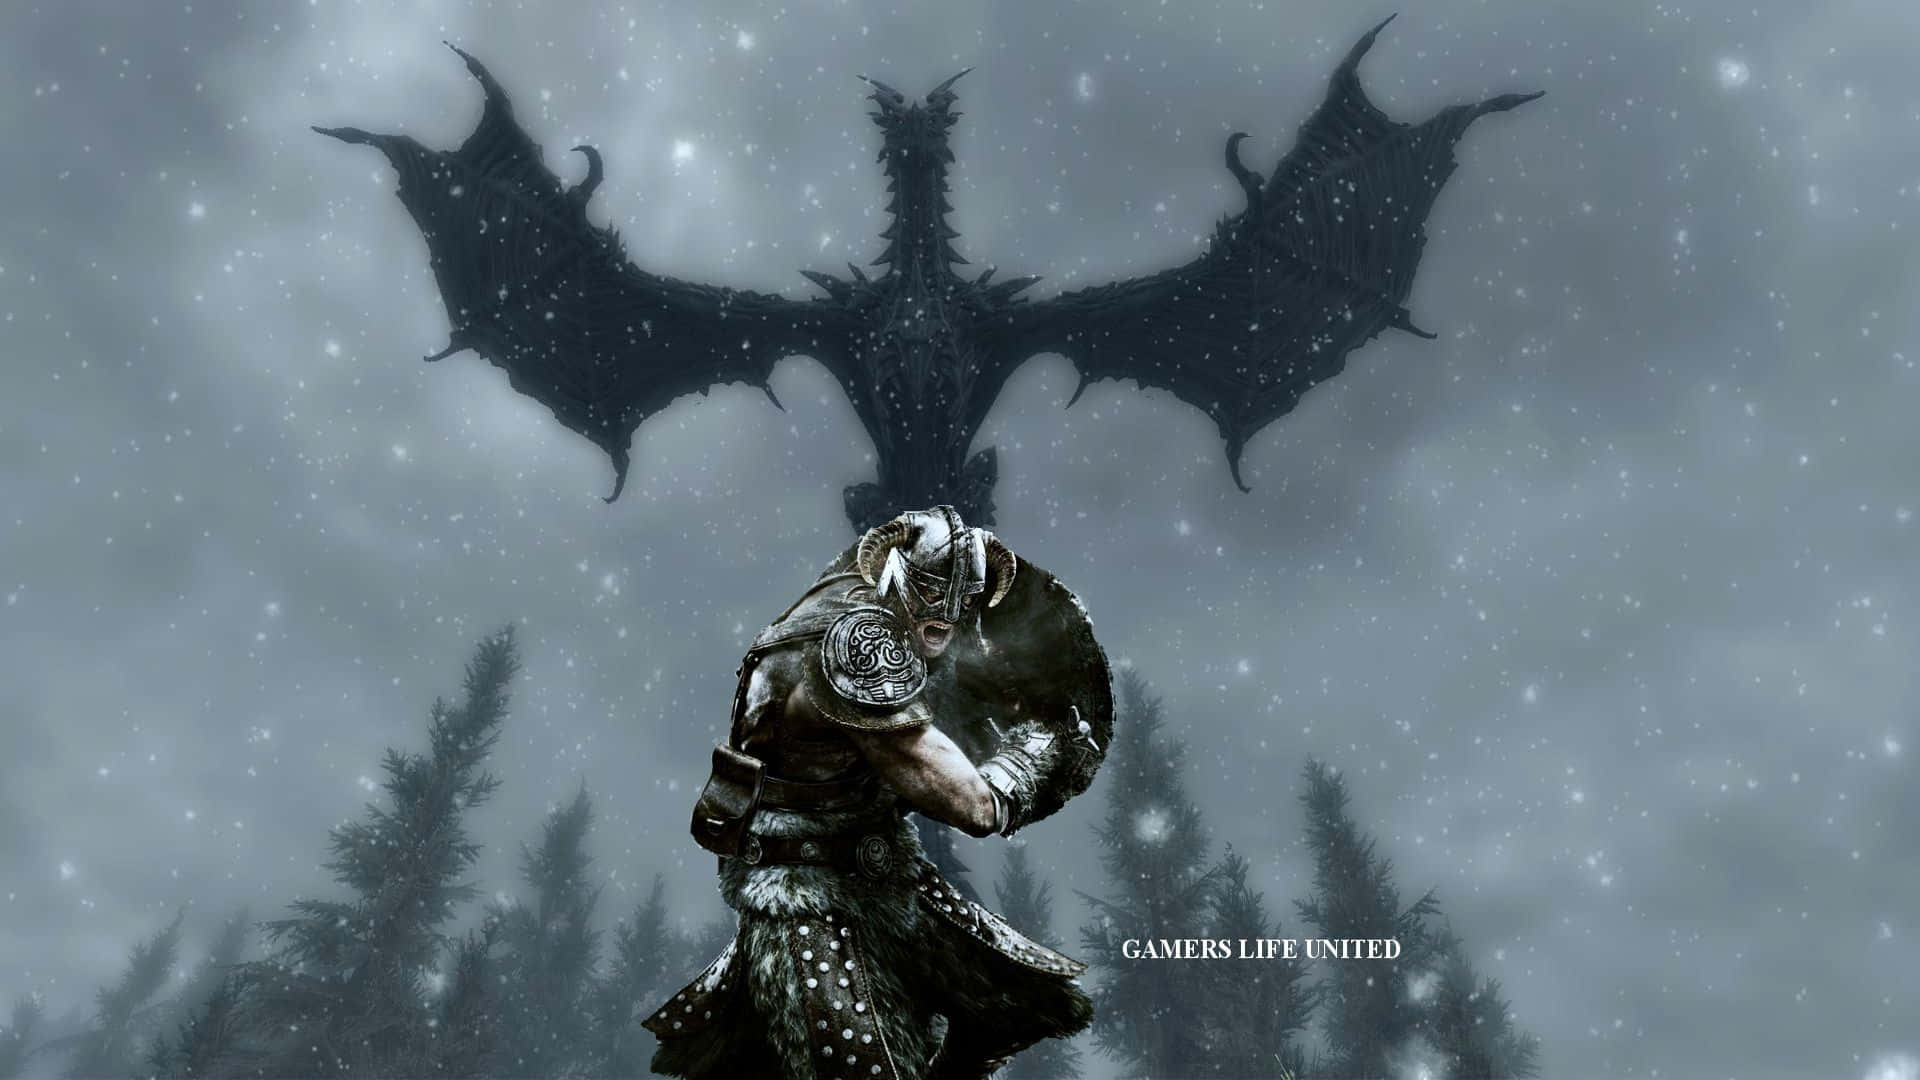 Alduin, the World-Eater Dragon, dominating the skies of Skyrim Wallpaper